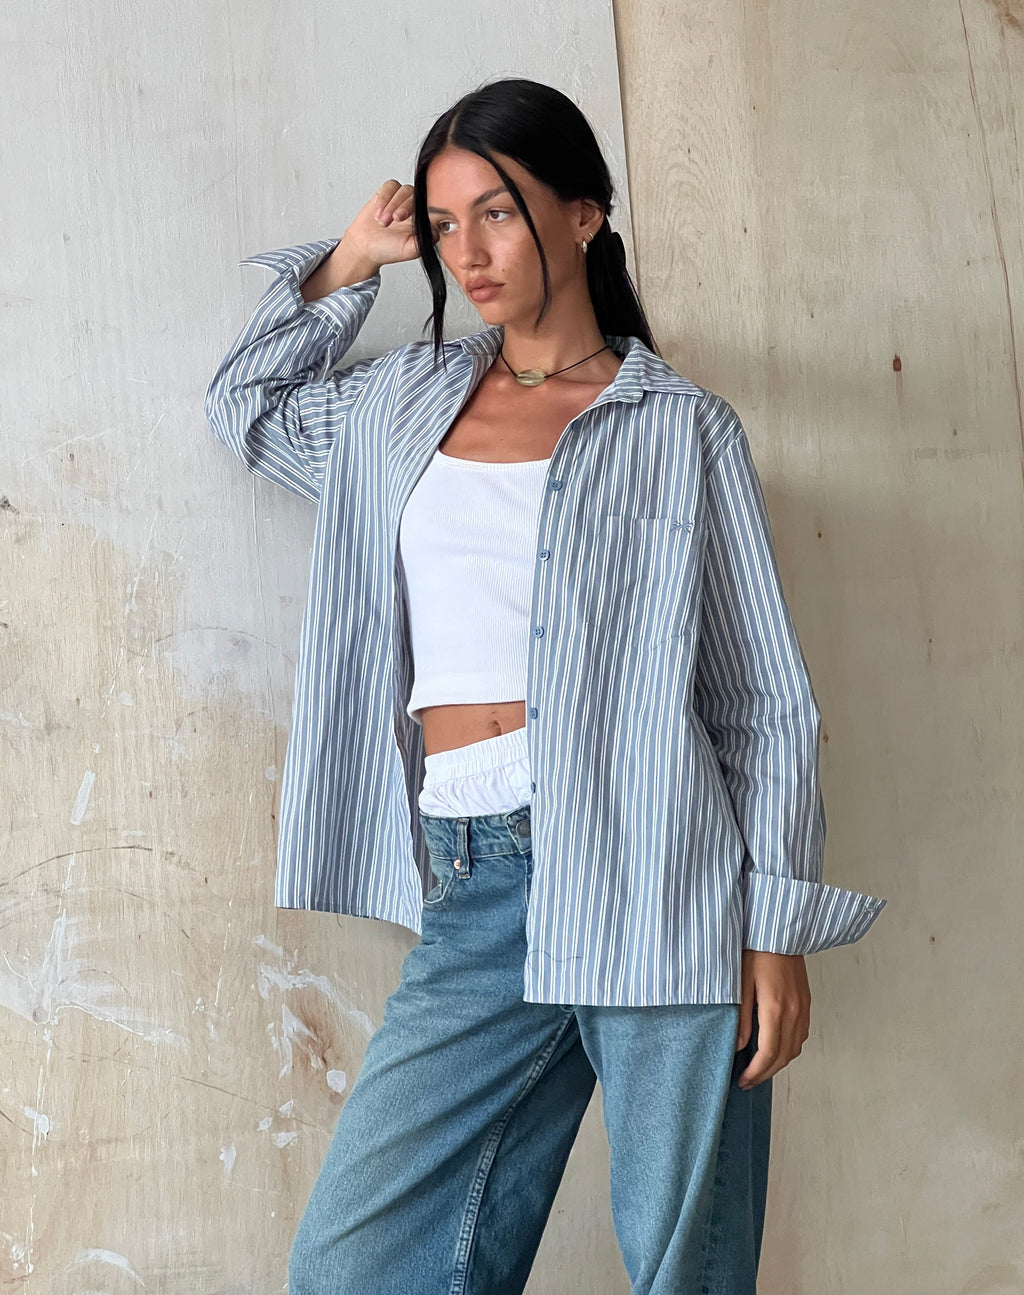 MOTEL X JACQUIE Turner Shirt in Grey and White Stripe with M Embroidery